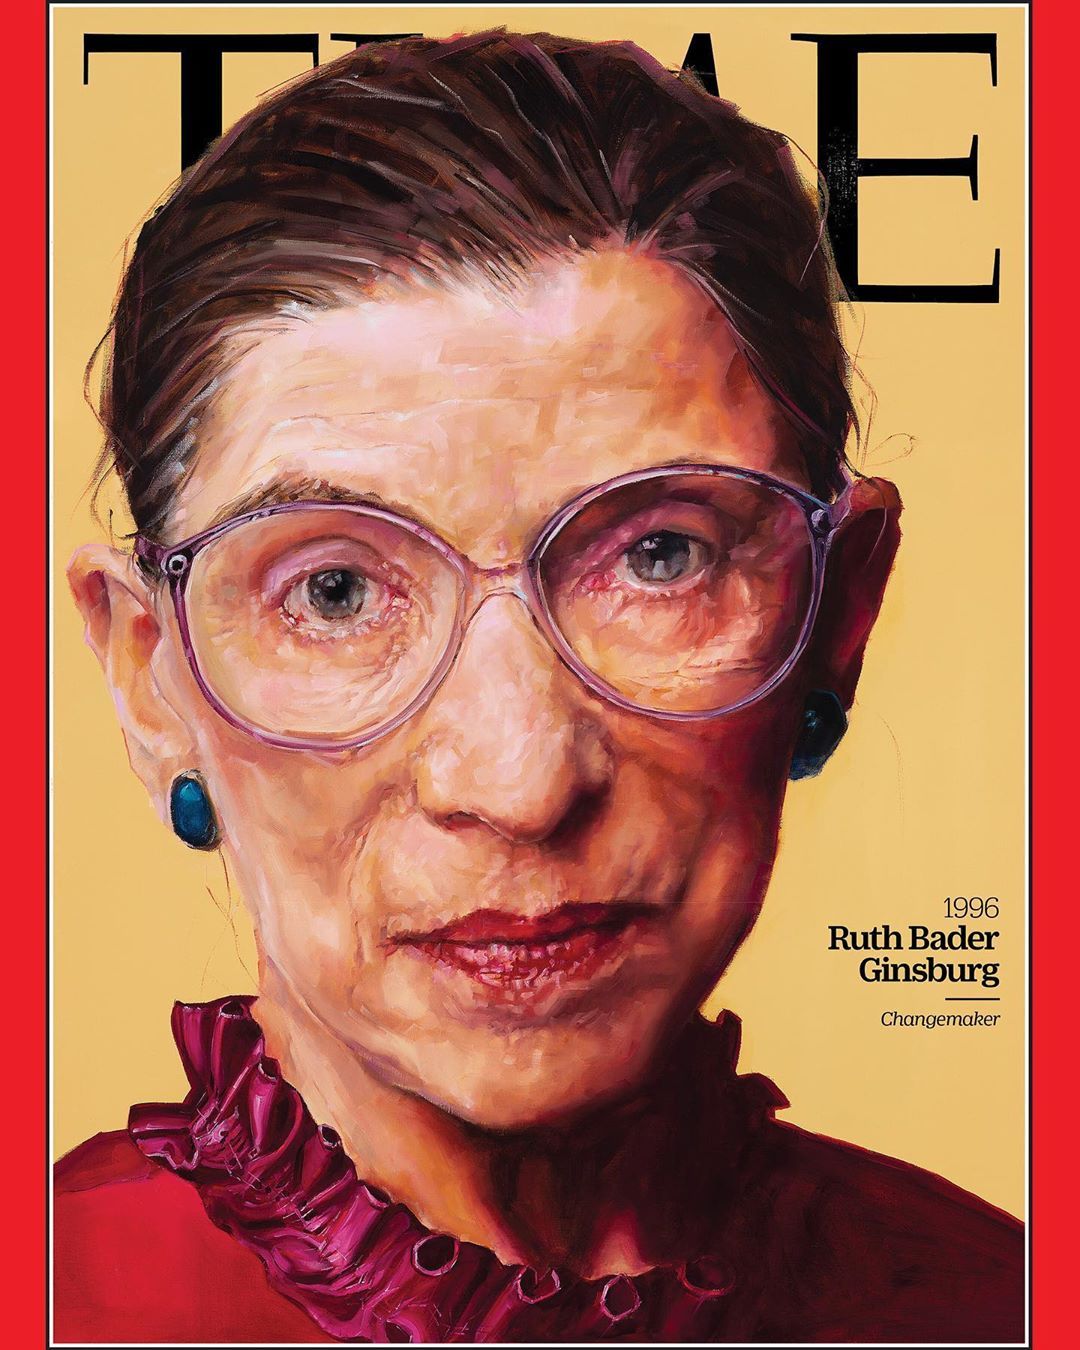 Today, the Notorious RBG turns 87. We honor her legacy and want her around much longer. If you want to protect her and all of our elders, stay at home as much as you can, and when you can’t, maintain strict handwashing and a 6-foot distance. Initial...